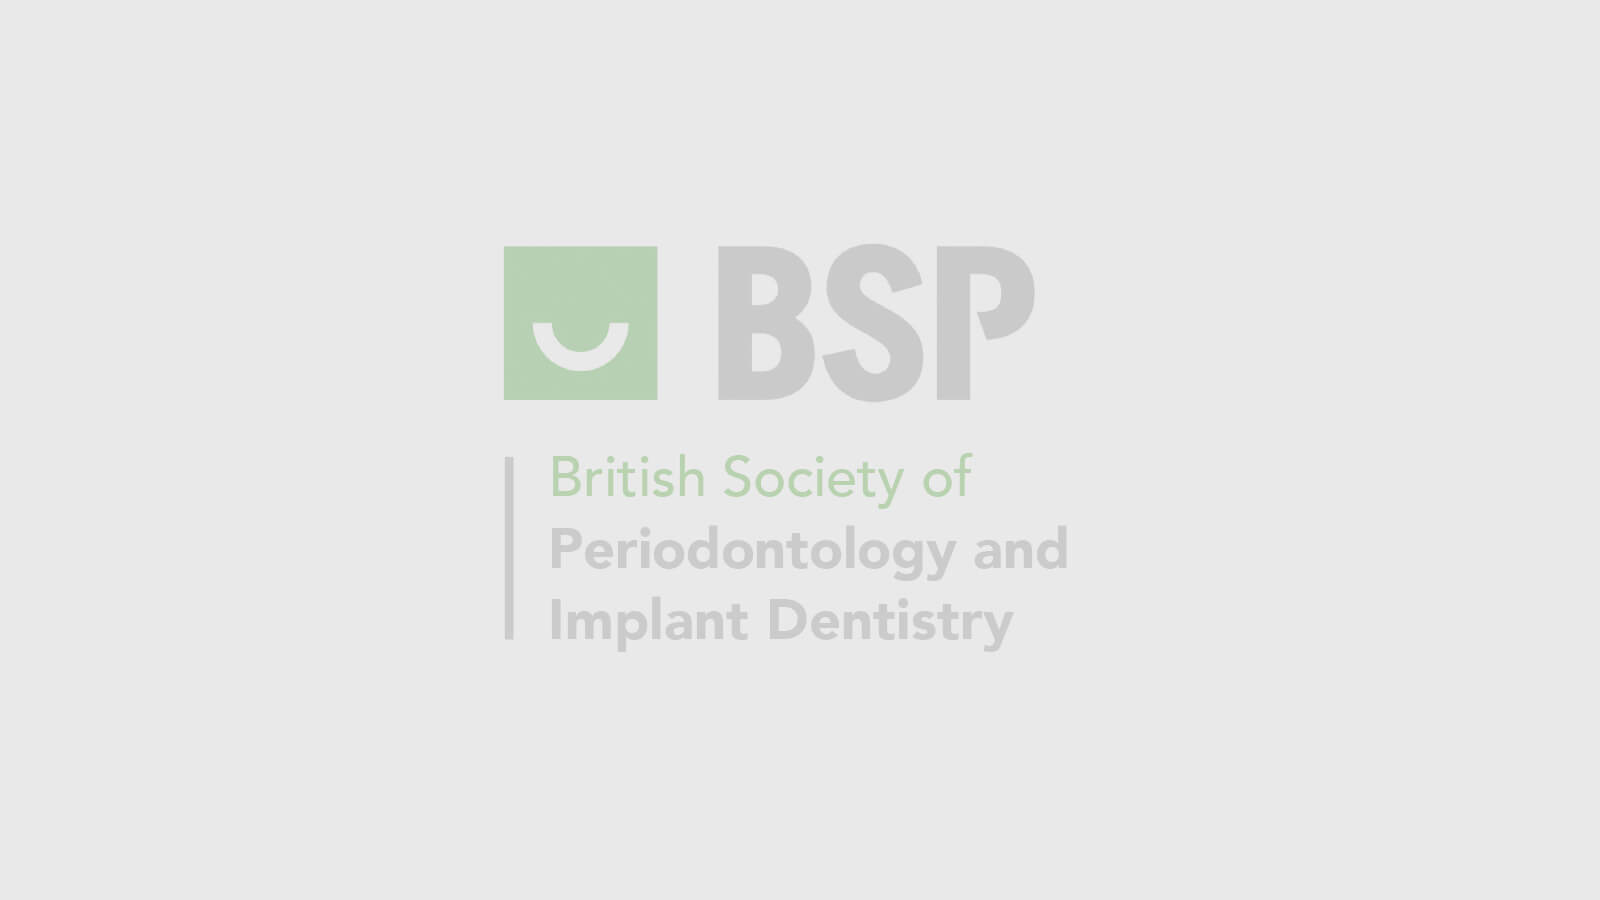 New case available for BSP members to see in the case studies section